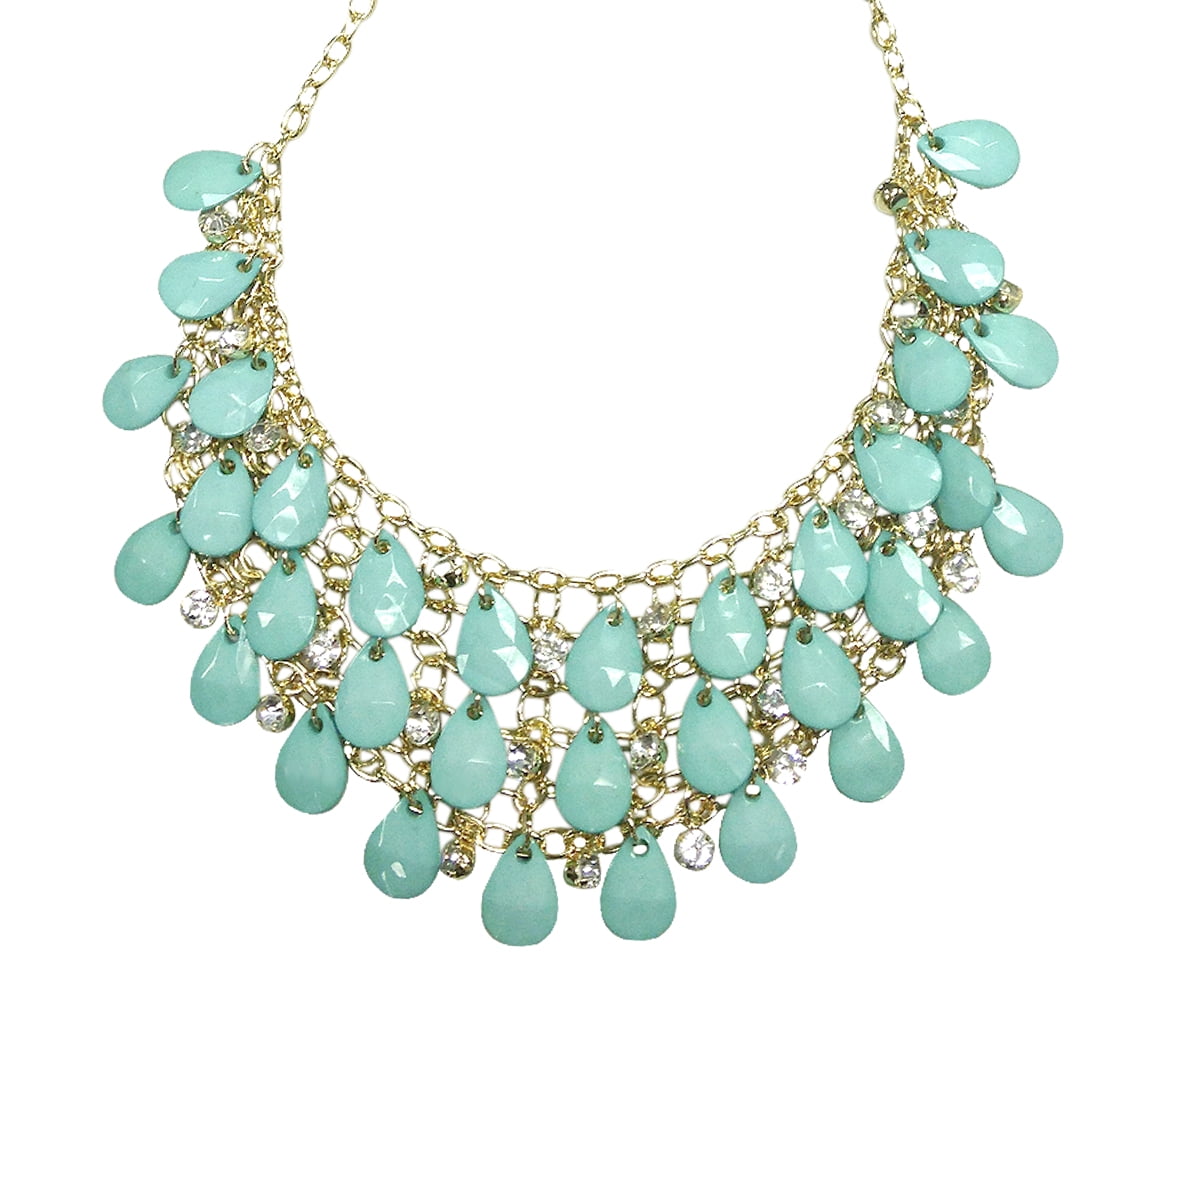 Wrapables® Multilayer Resin and Crystal Bubble Bib Necklace, Mint ...